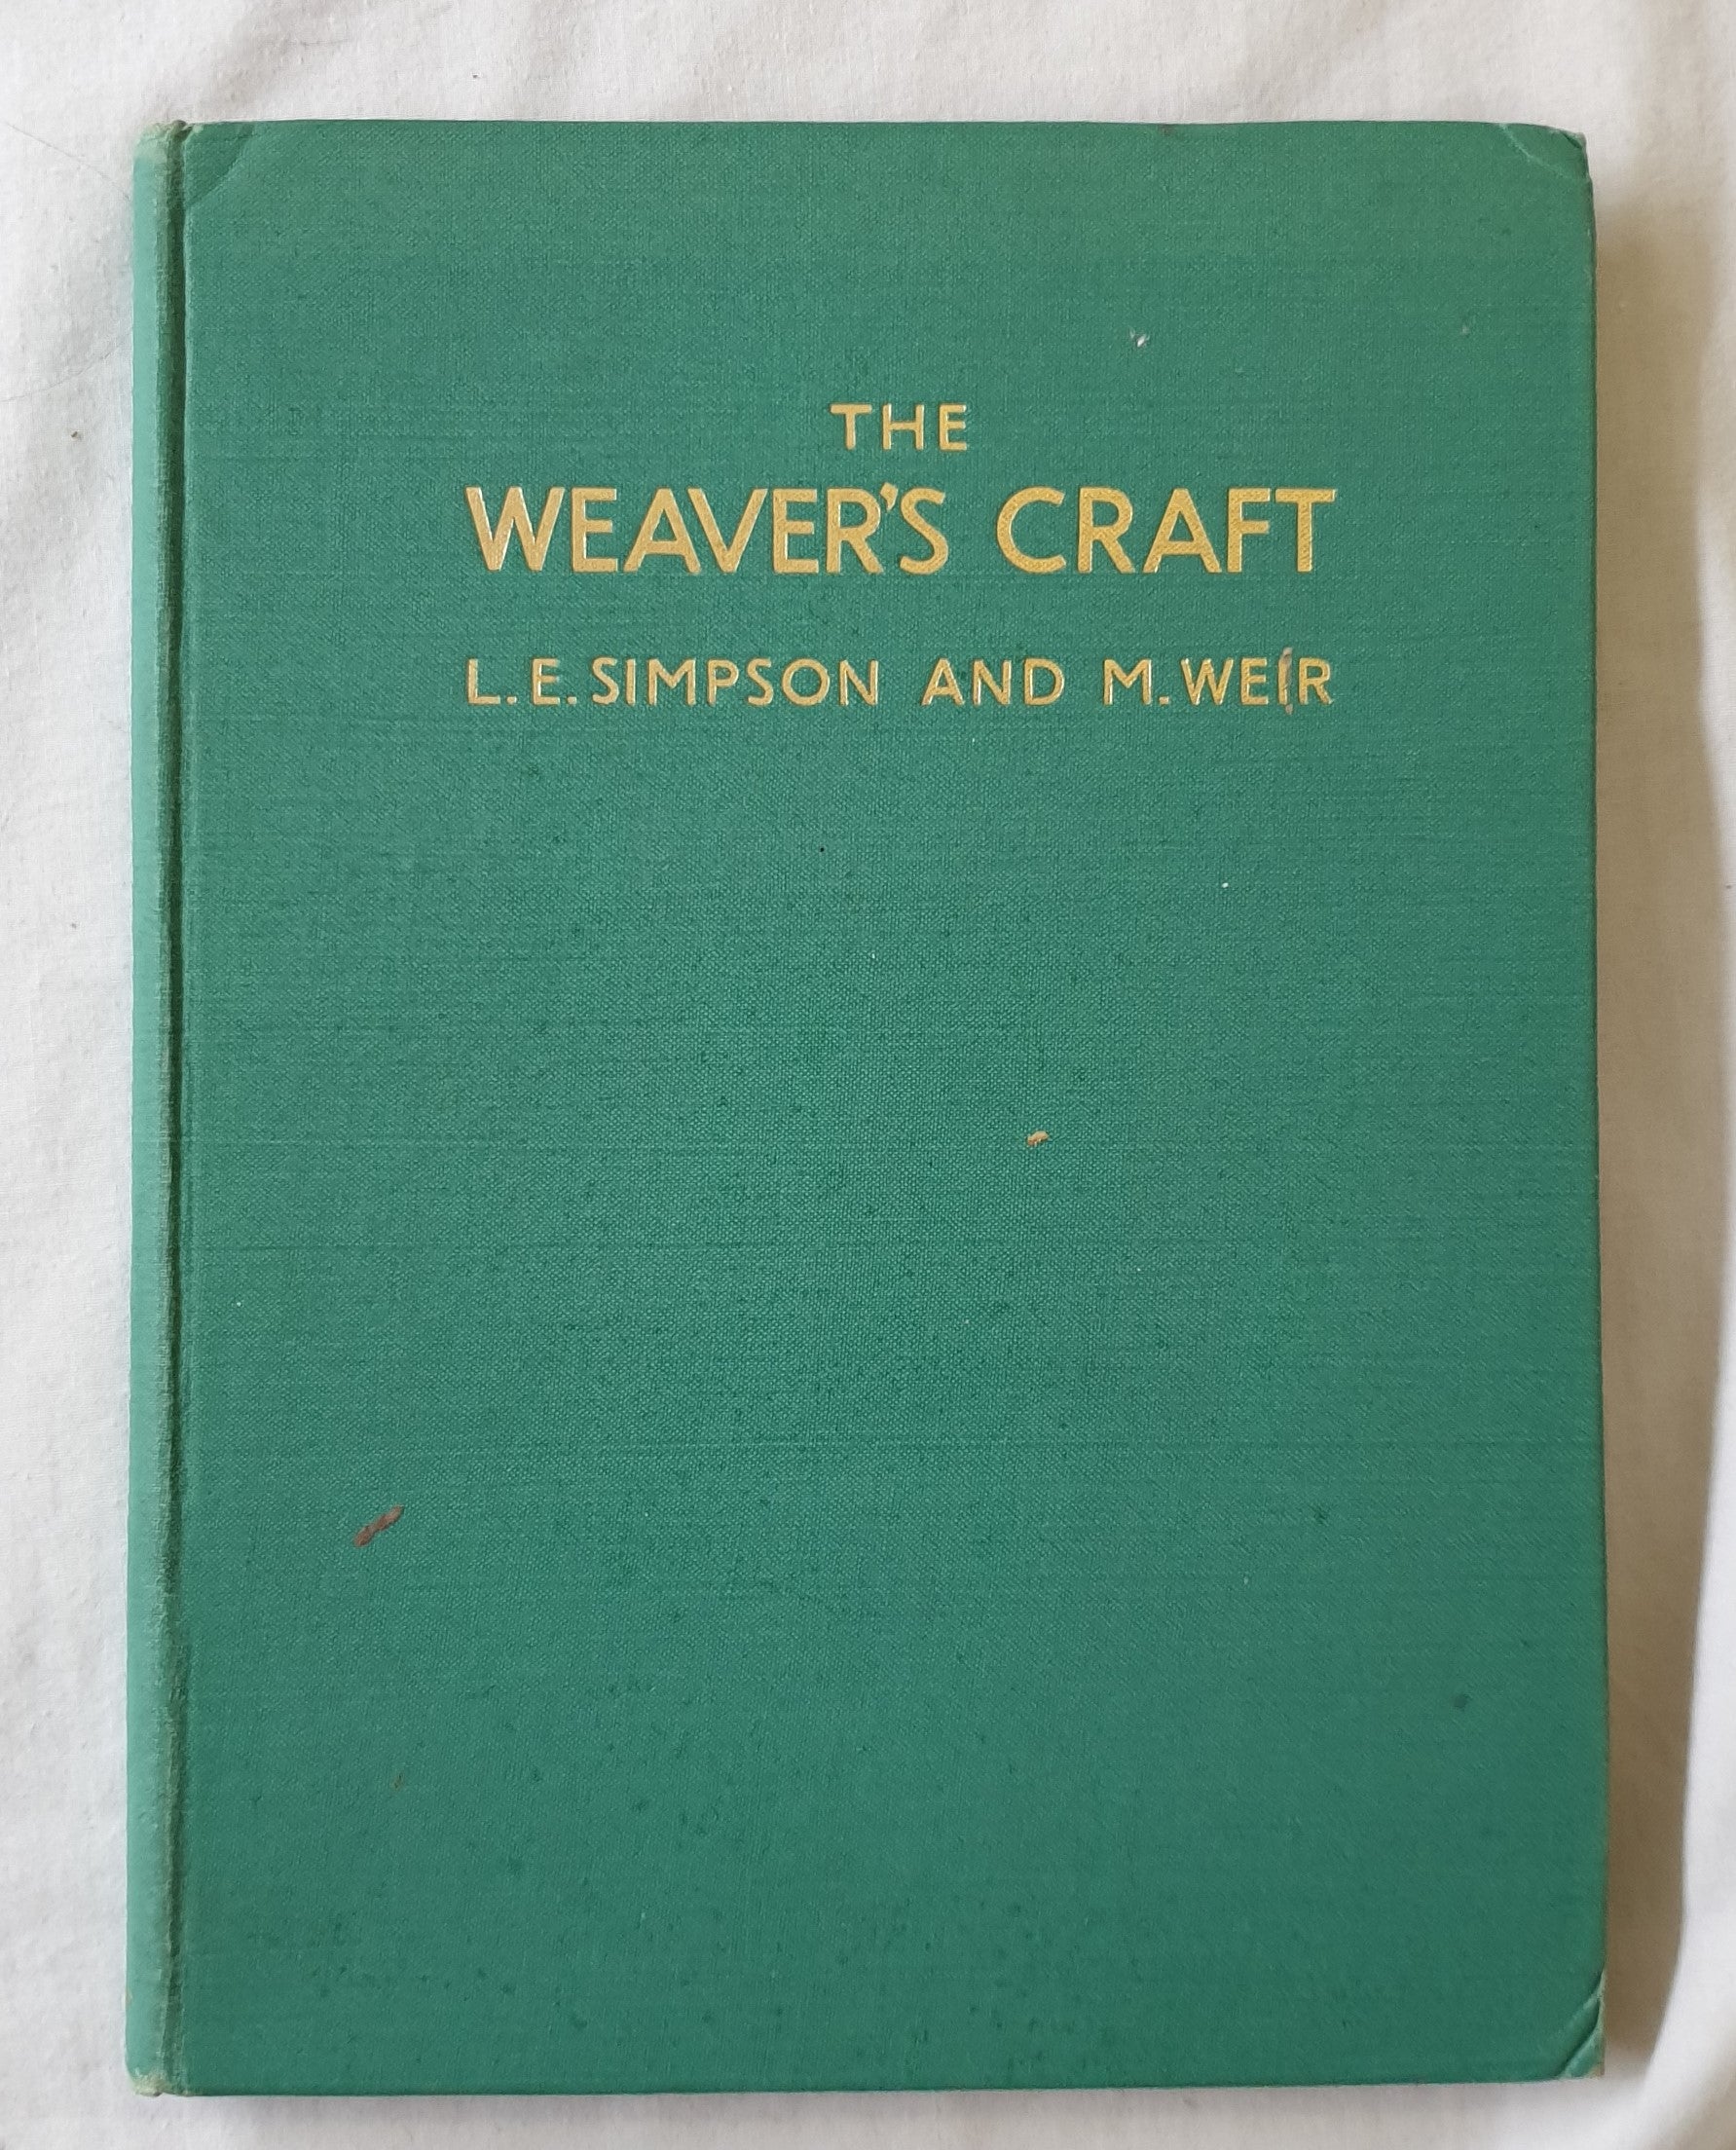 The Weaver's Craft by L. E. Simpson and M. Weir